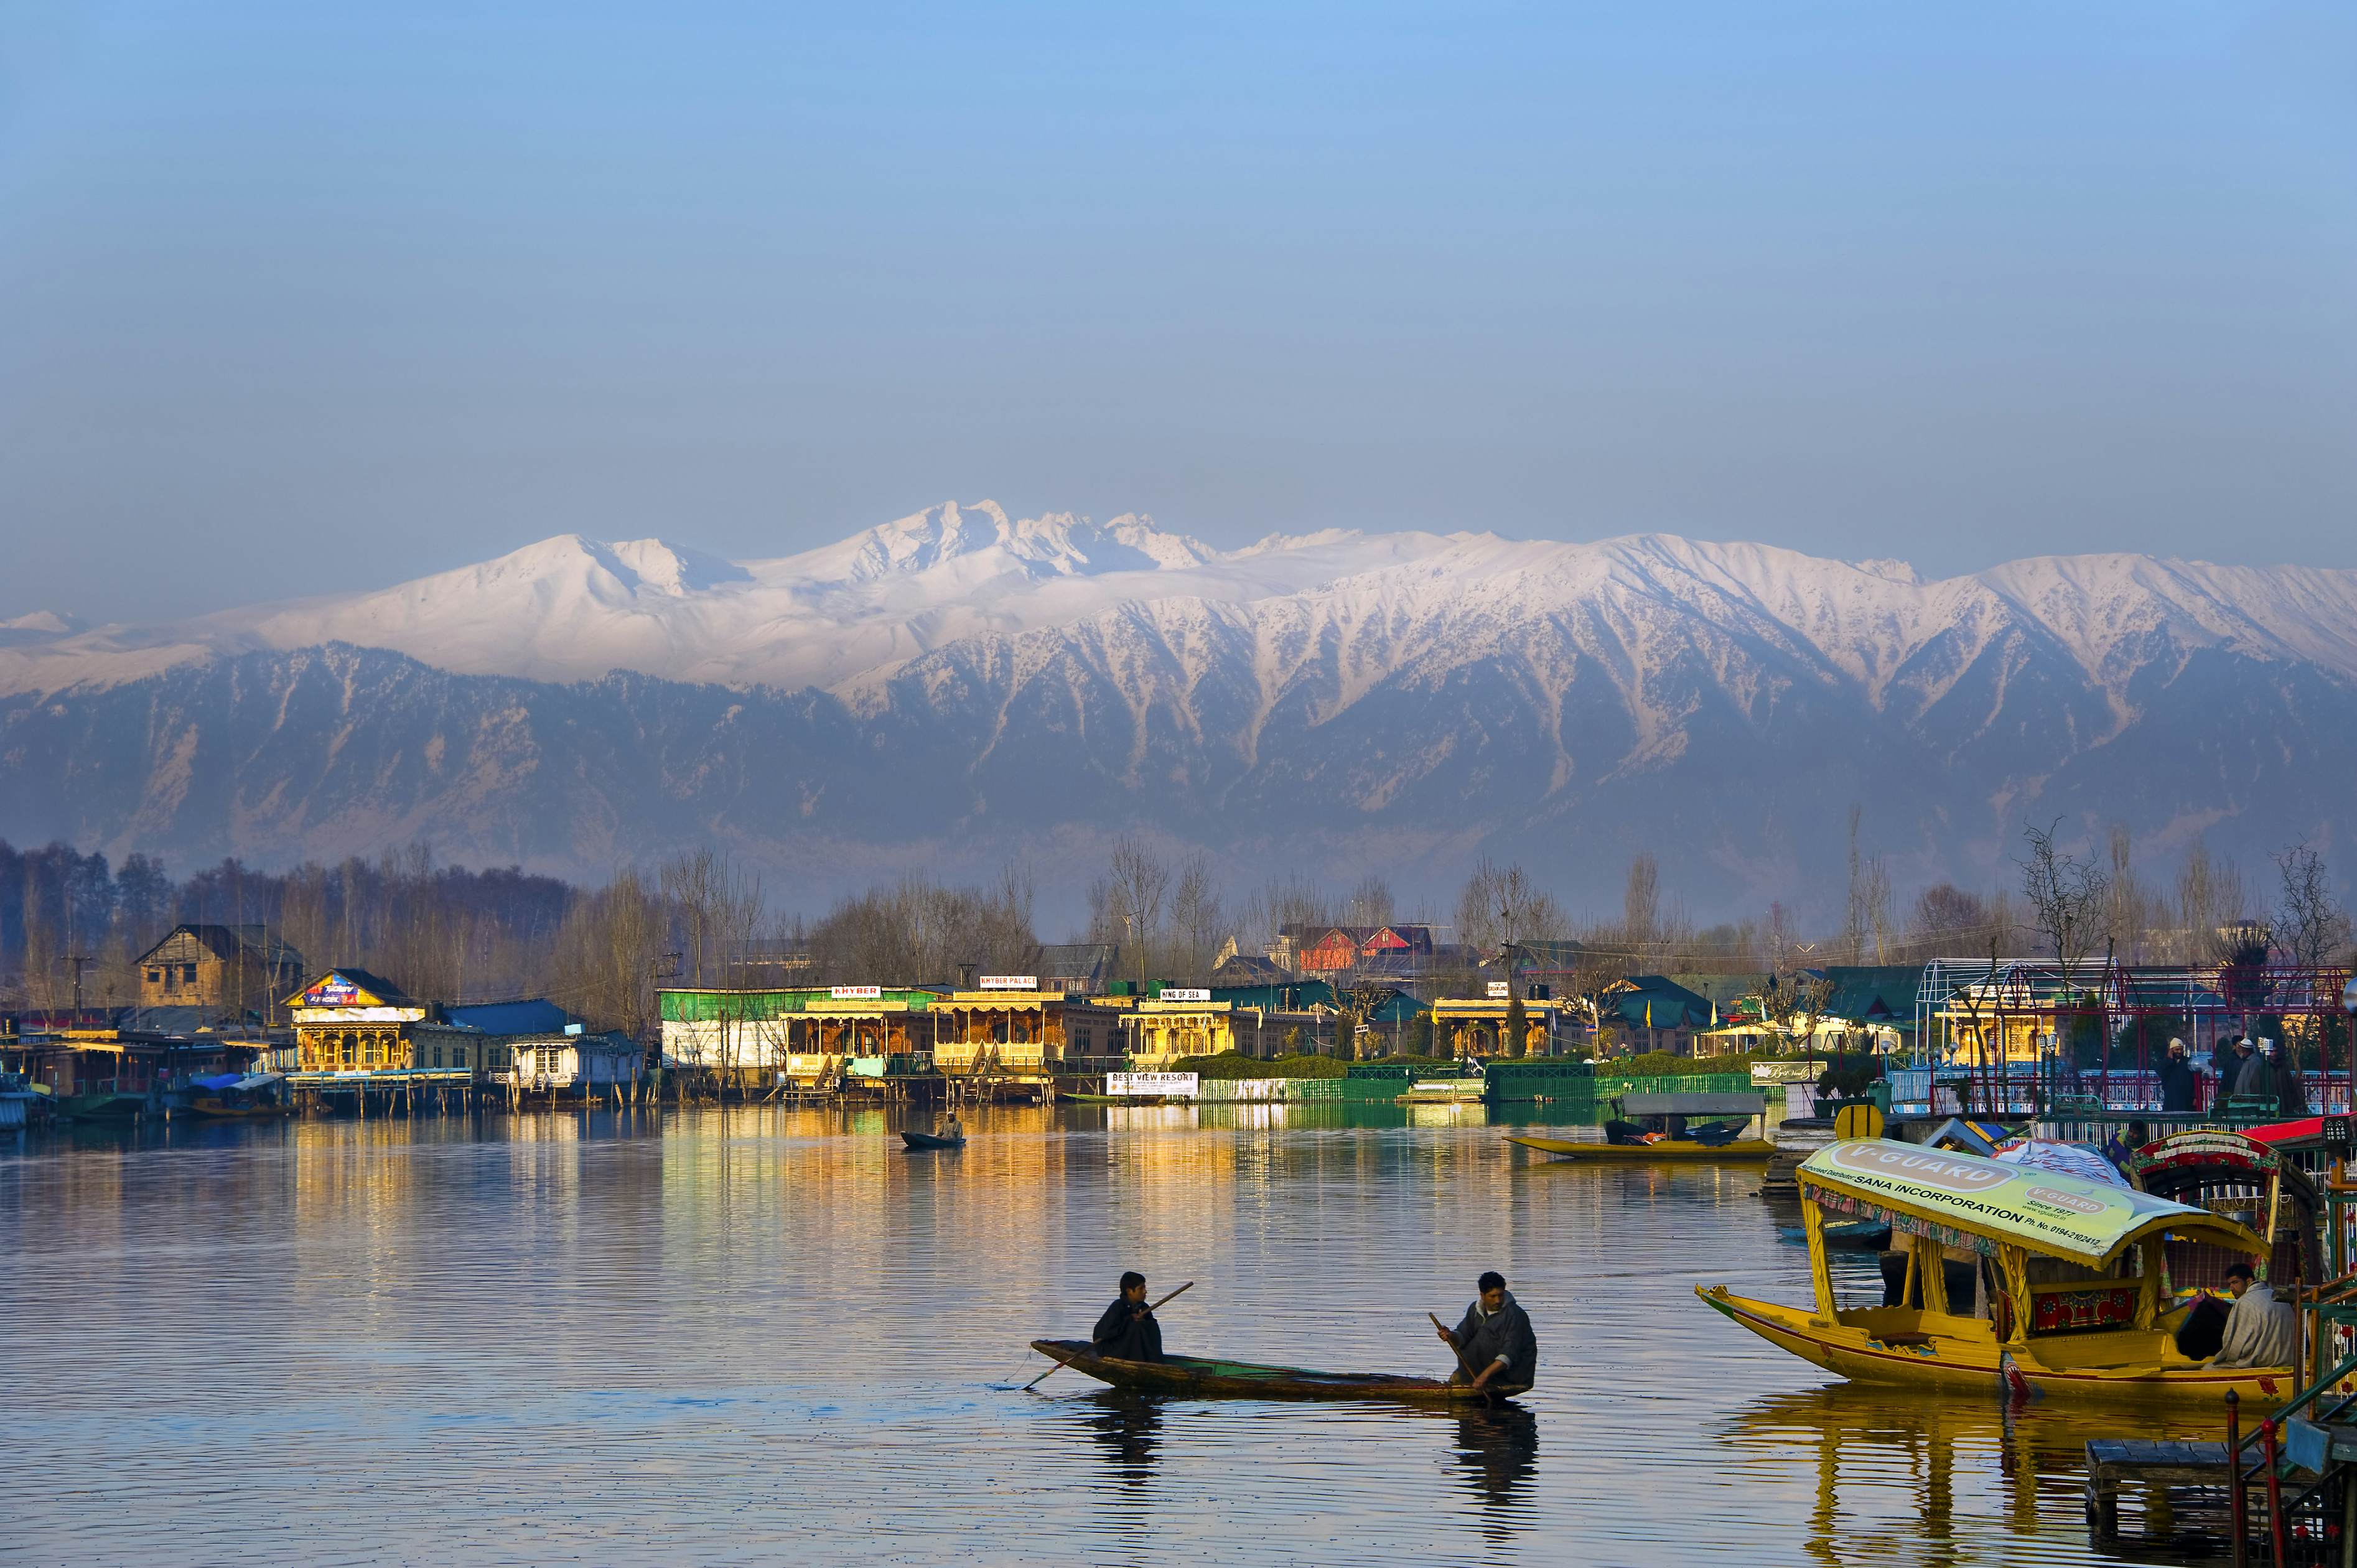 Srinagar Guide: Things to Do, See and Eat